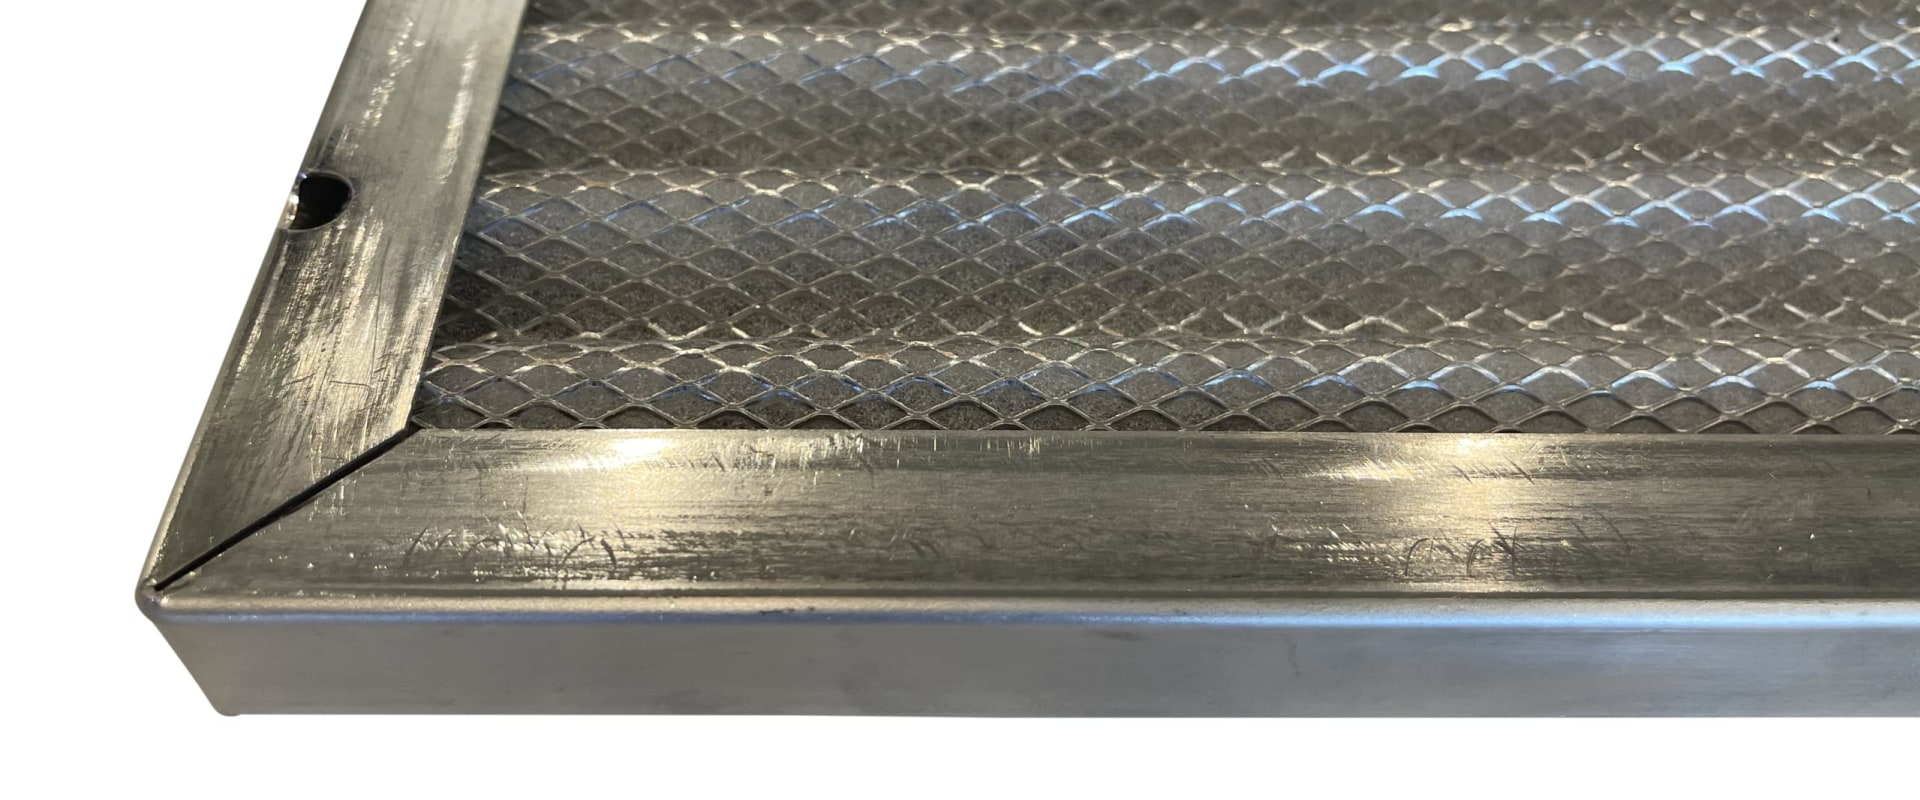 What Type of Material is Used in Electrostatic or Washable 20 x 20 x 1 Air Filters for HVAC Systems and Cars/Trucks Ventilation Systems?